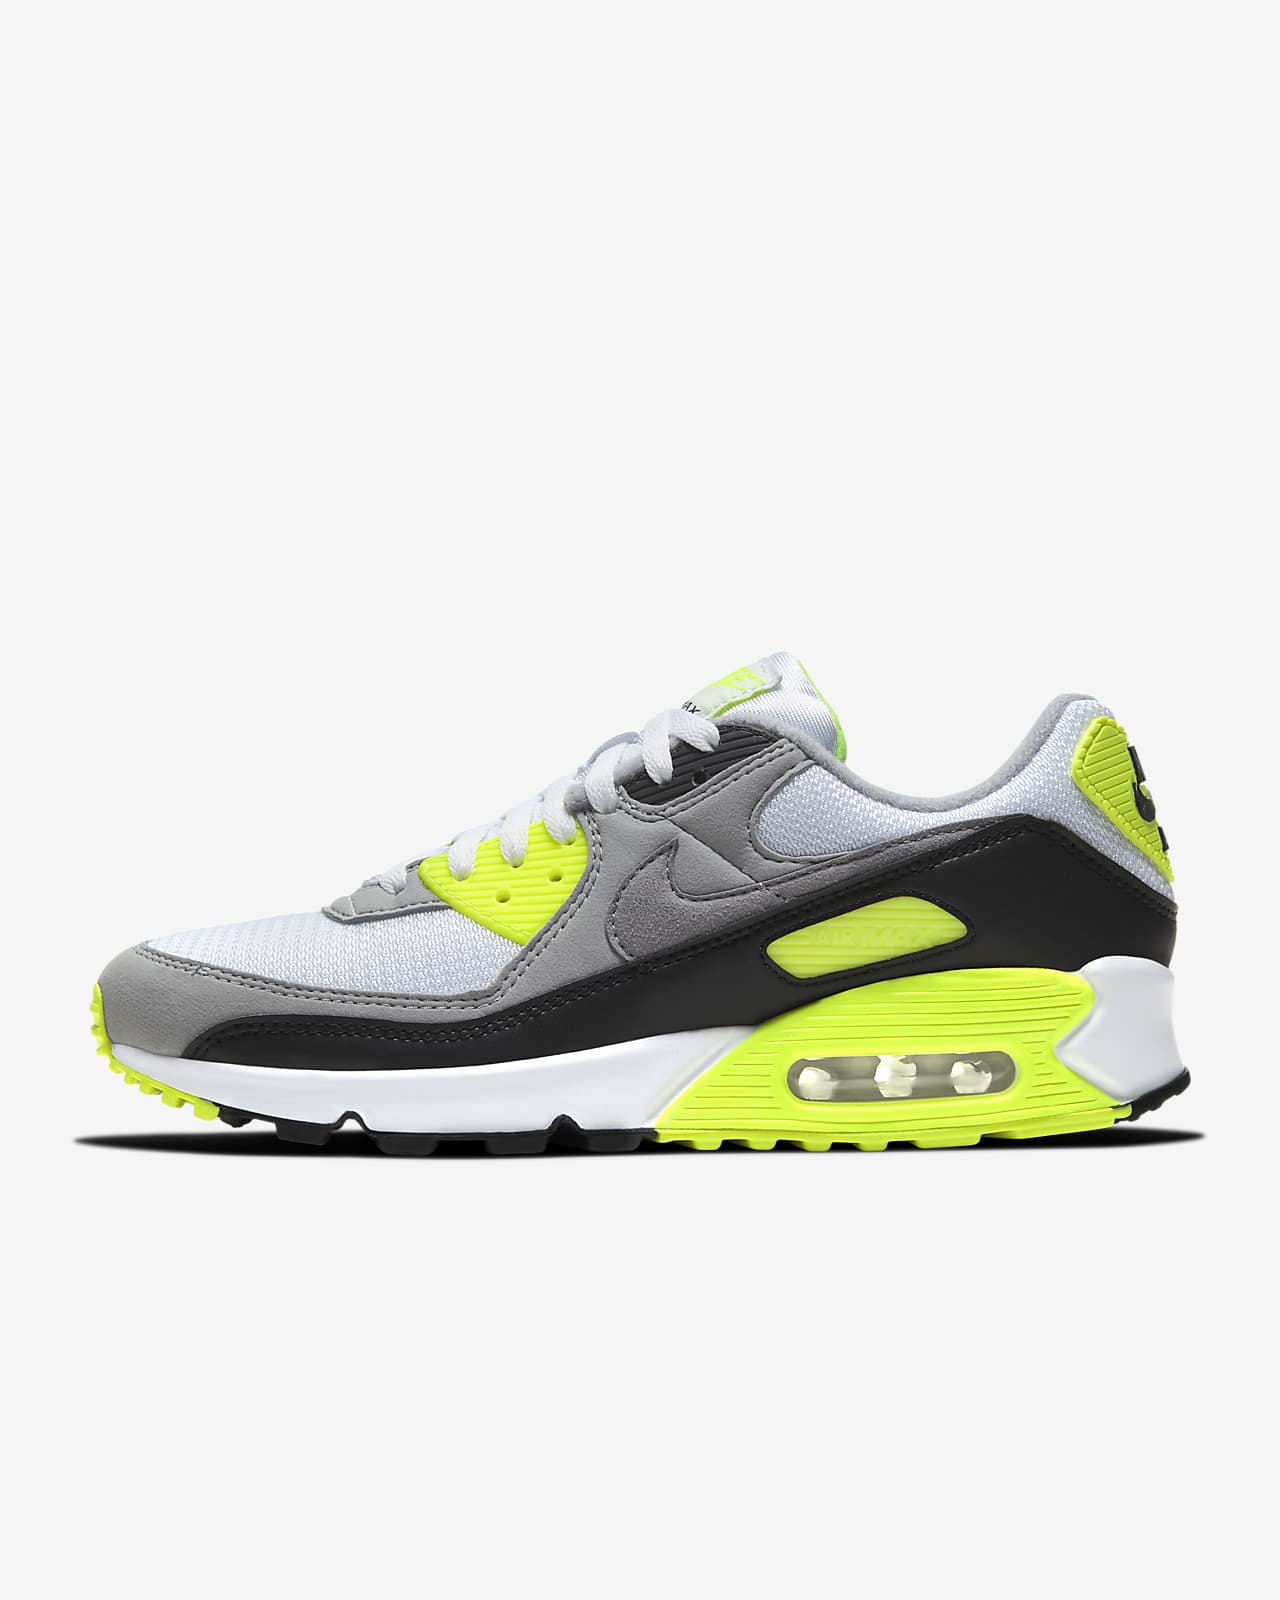 how much are air max 90s